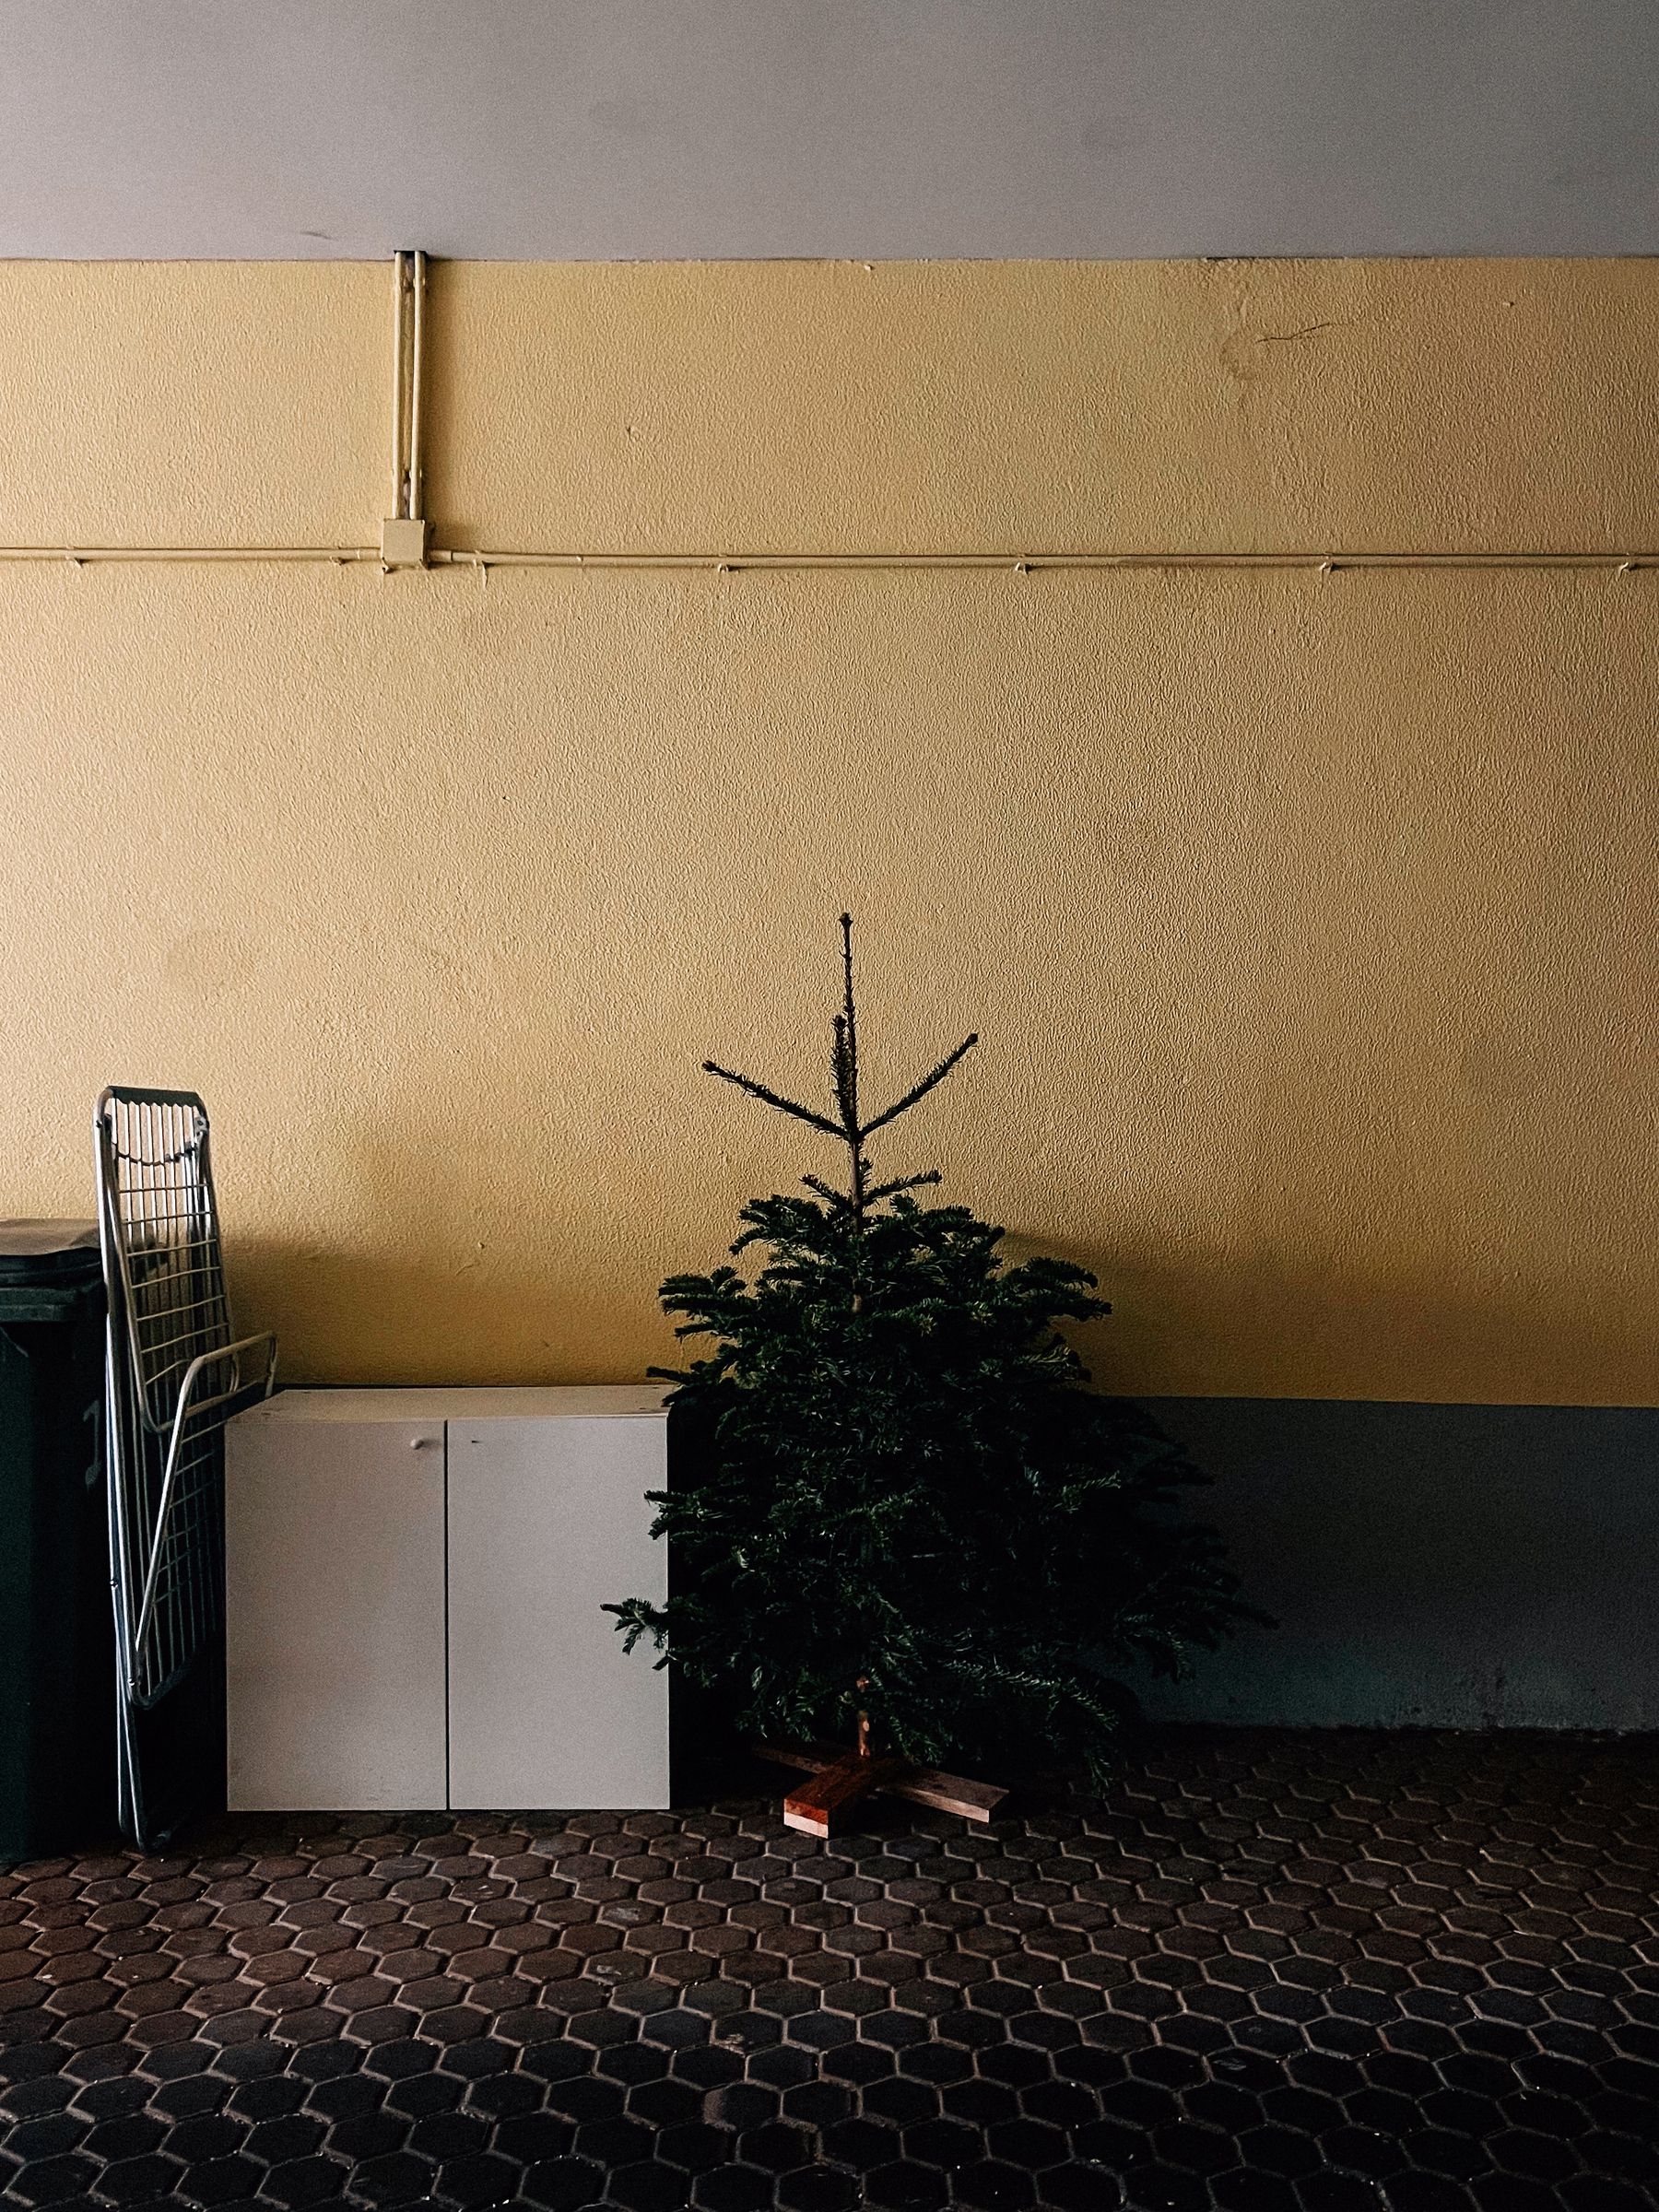 A Christmas tree in a corner, against a textured wall and hexagonal floor tiles.